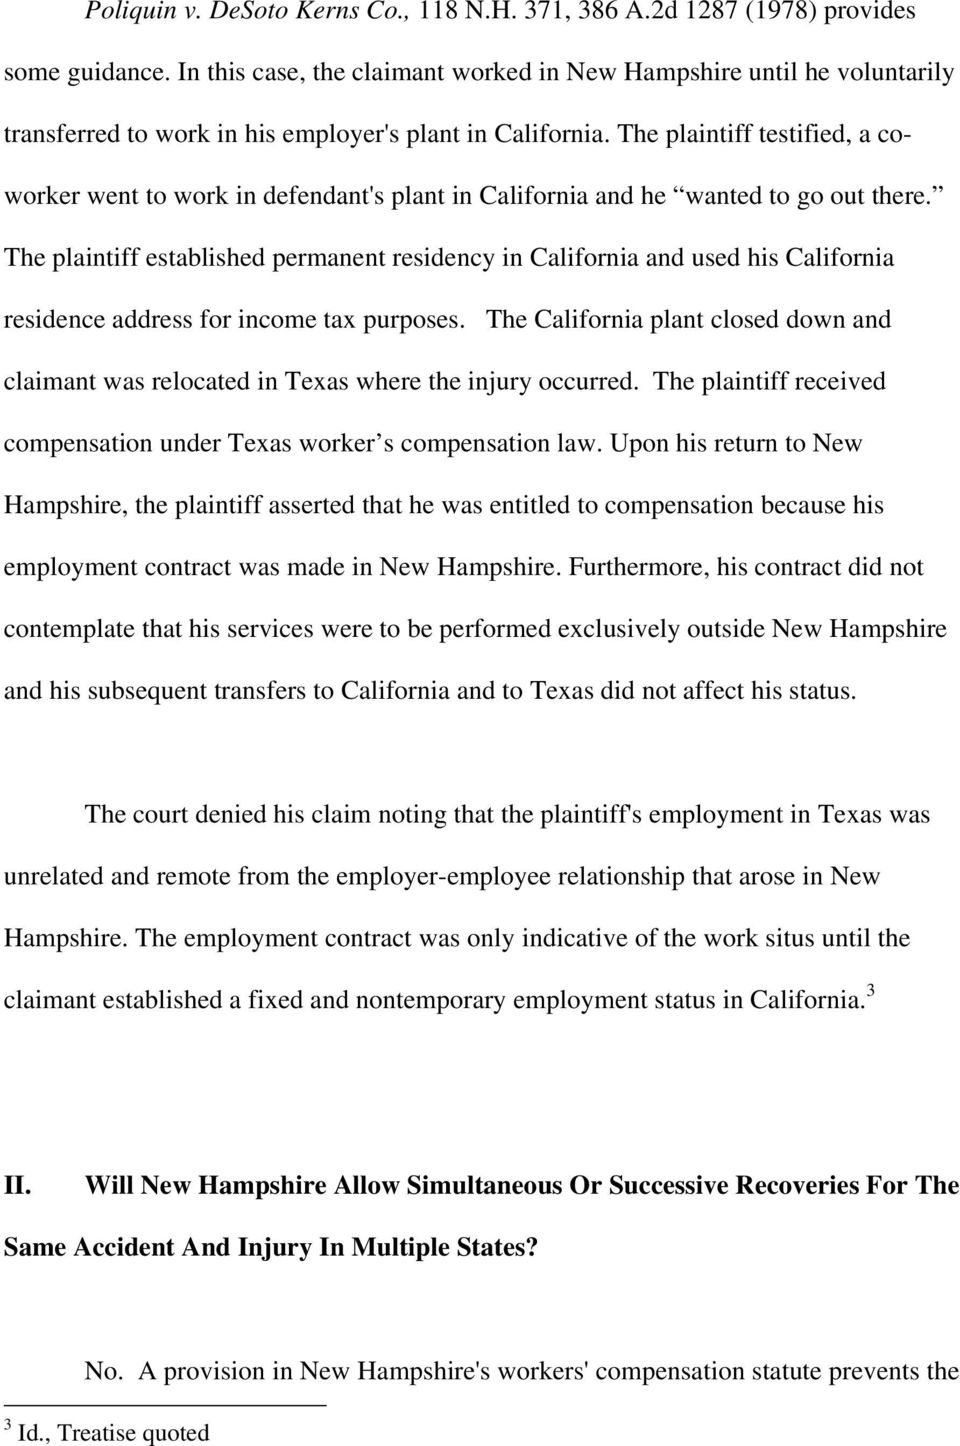 The plaintiff testified, a coworker went to work in defendant's plant in California and he wanted to go out there.